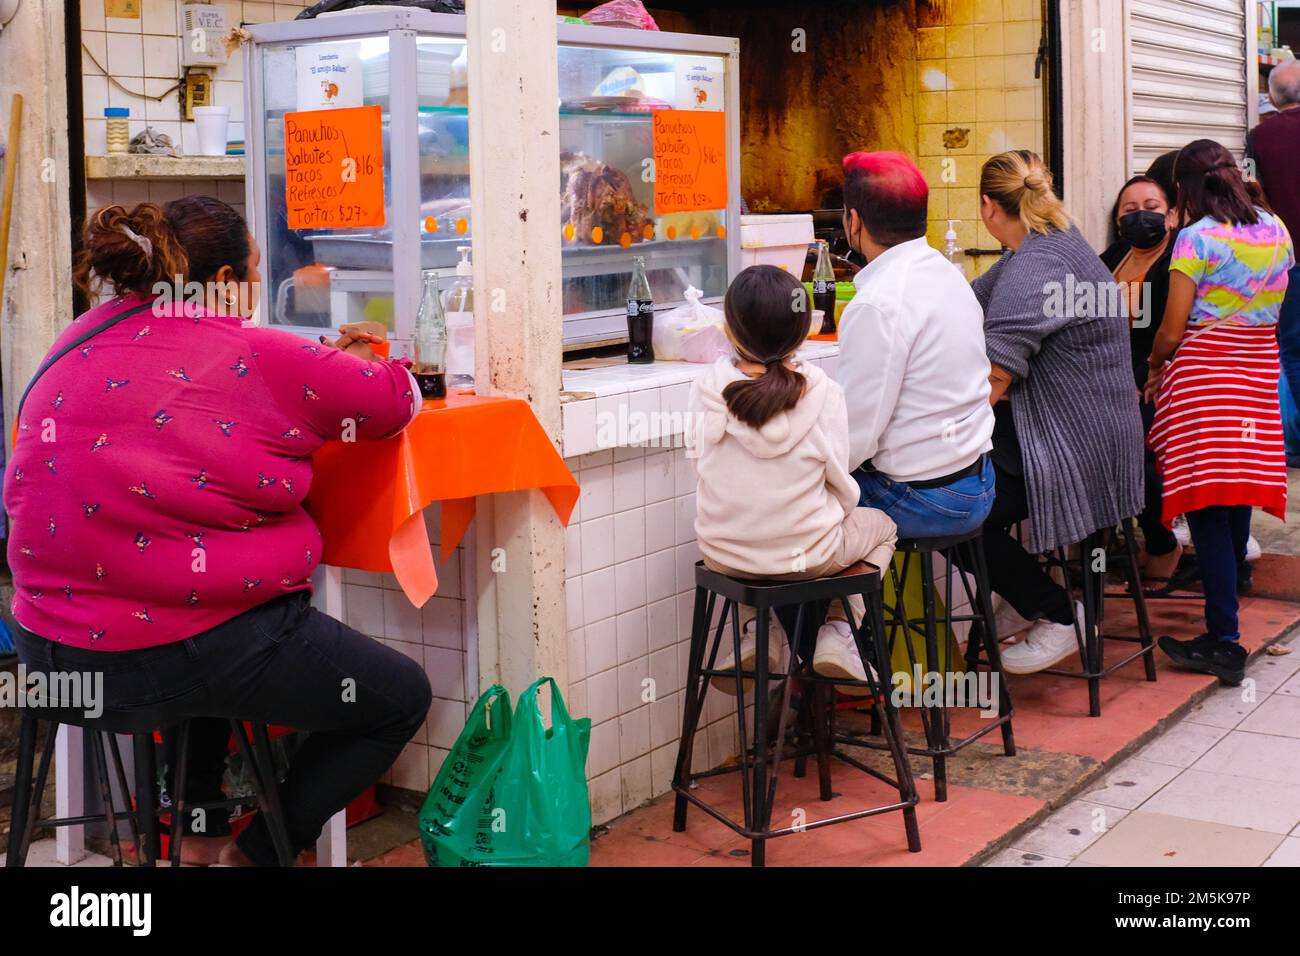 People having lunch in a snack-bar at the Lucas de Galvez Market in the center of Merida, Yucatan, Mexico Stock Photo